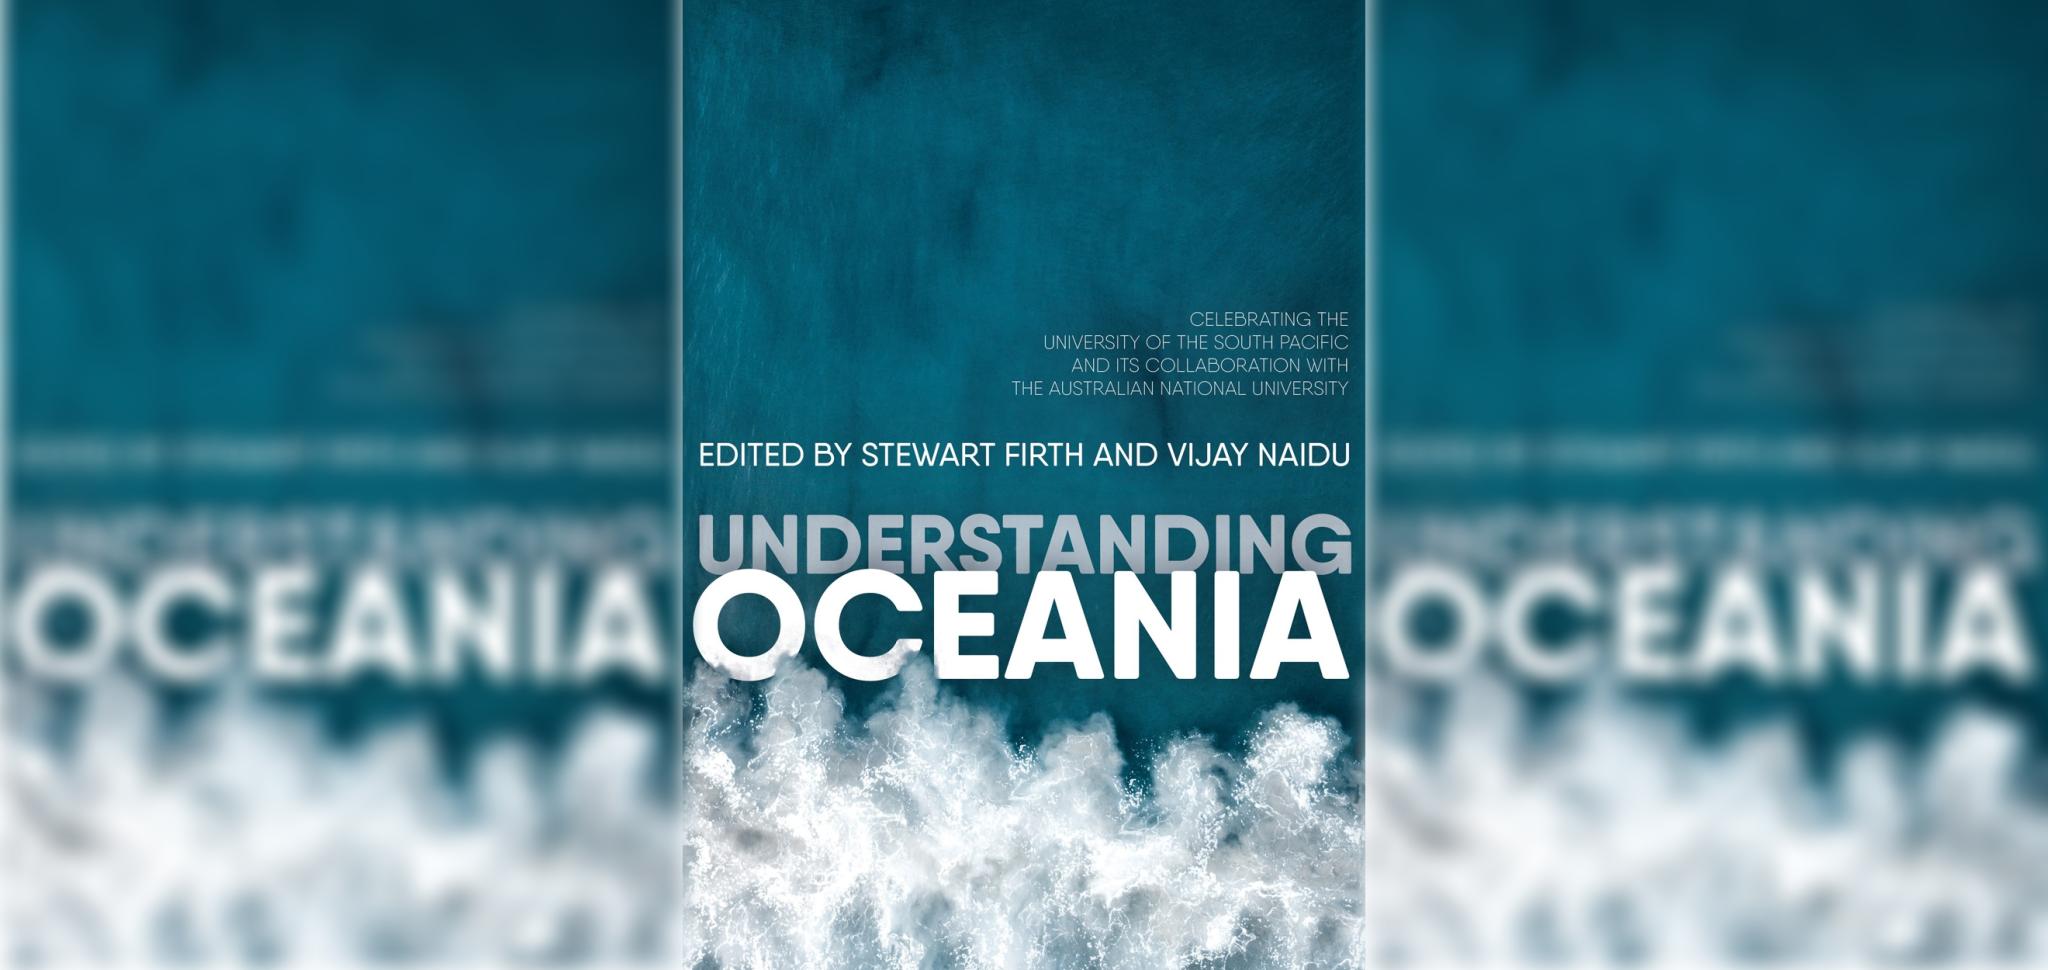 Understanding Oceania Celebrating the University of the South Pacific and its collaboration with The Australian National University